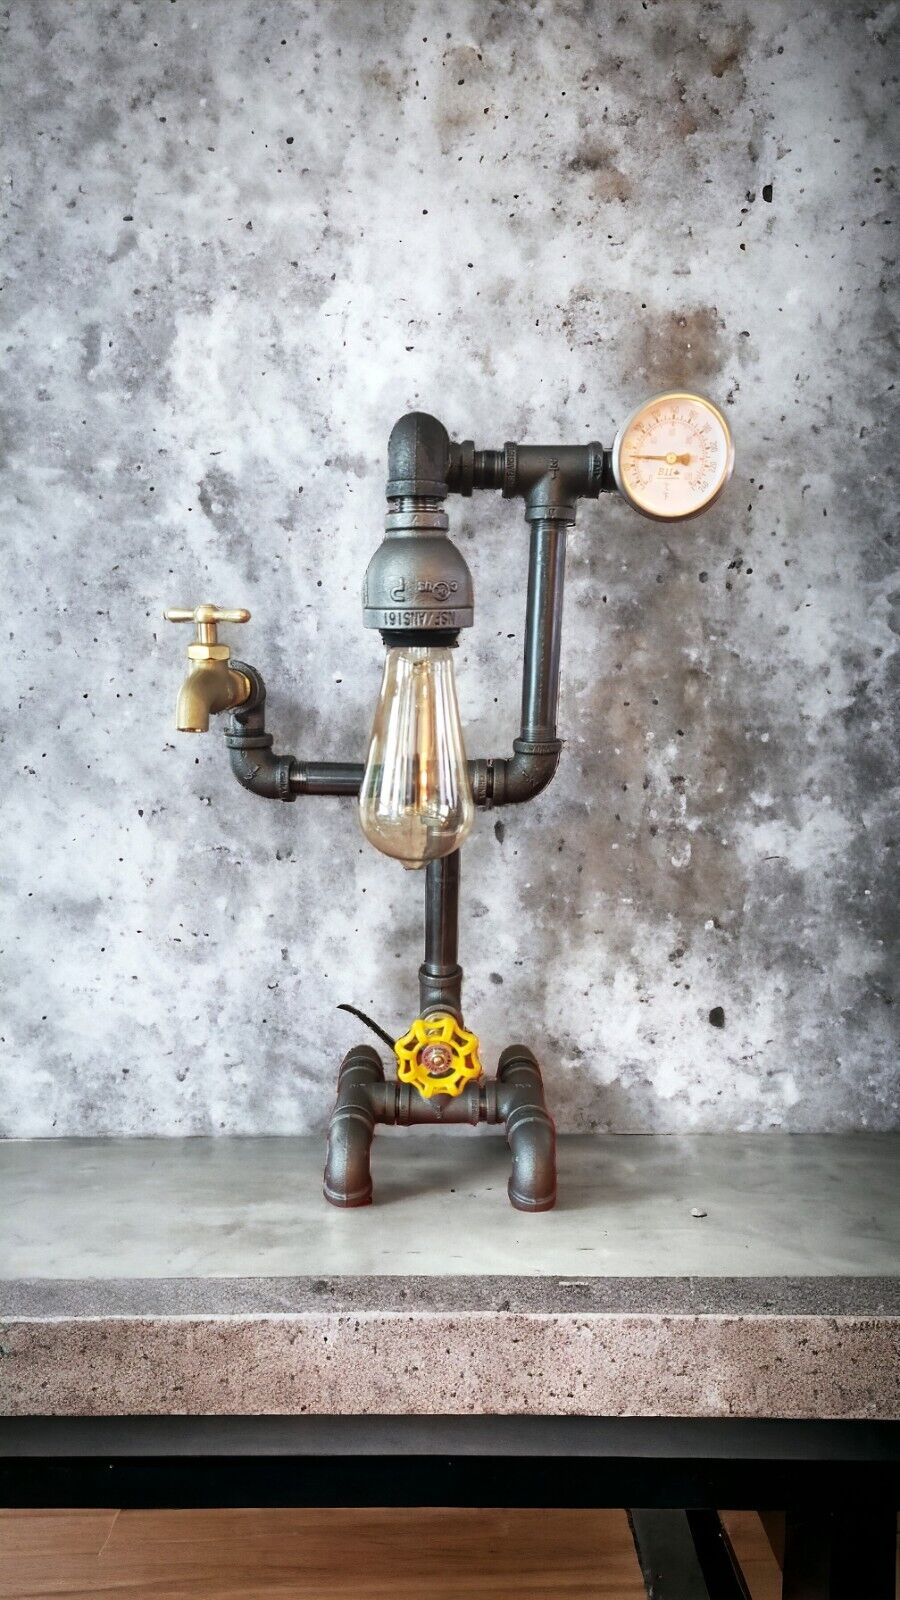 New rustic Industrial pipe style table with temp gauge, valve on/off switch